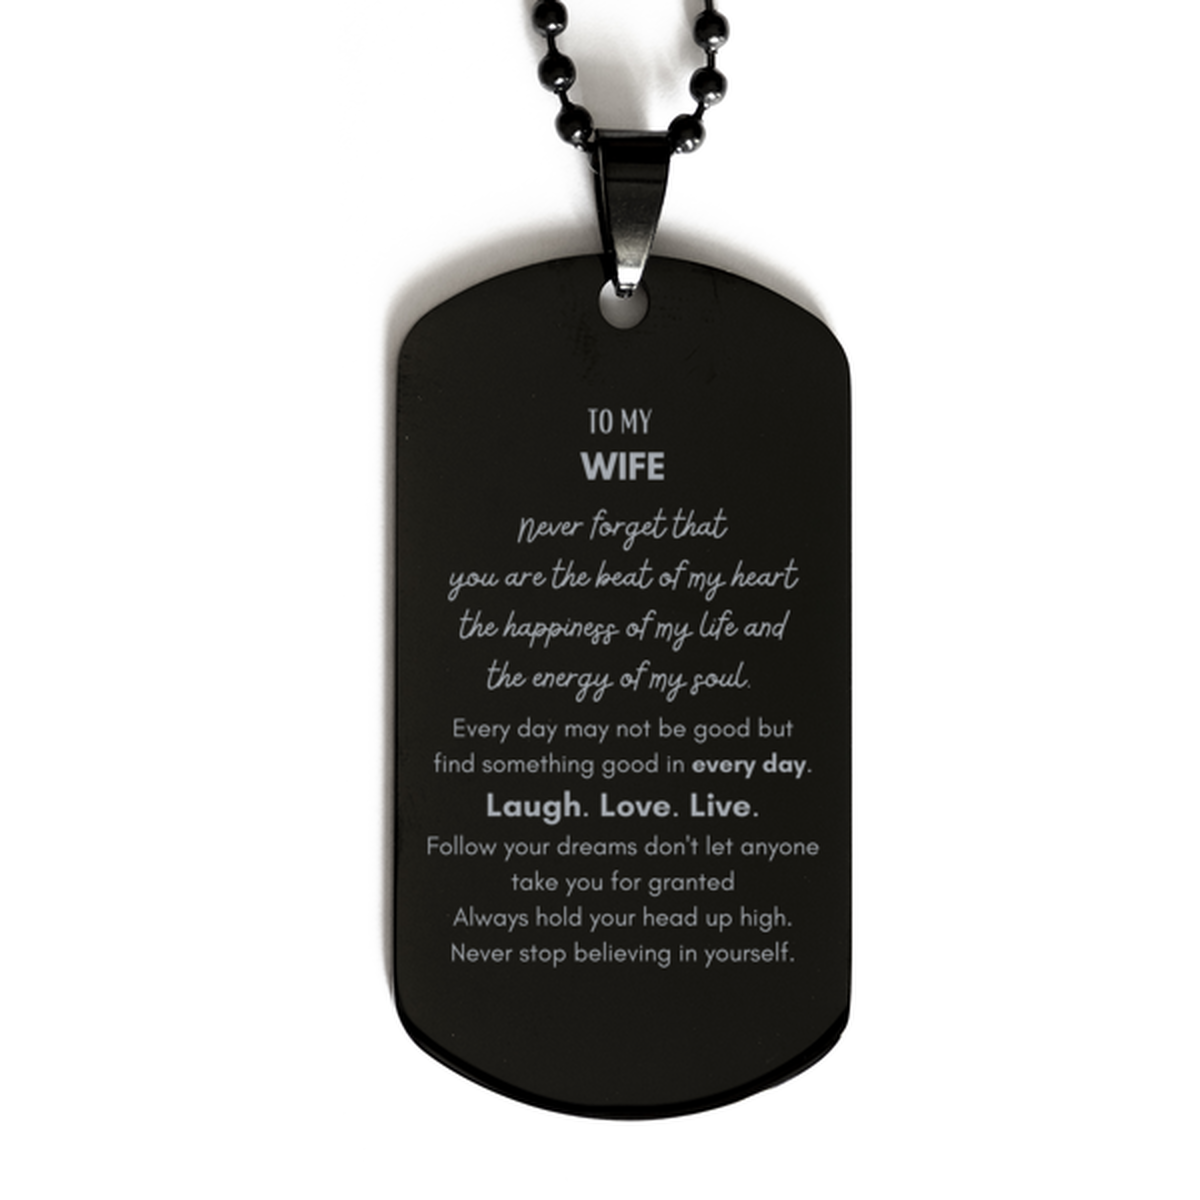 To My Wife Dogtag Gifts, Christmas Wife Black Dog Tag Present, Birthday Unique Motivational For Wife, To My Wife Never forget that you are the beat of my heart the happiness of my life and the energy of my soul